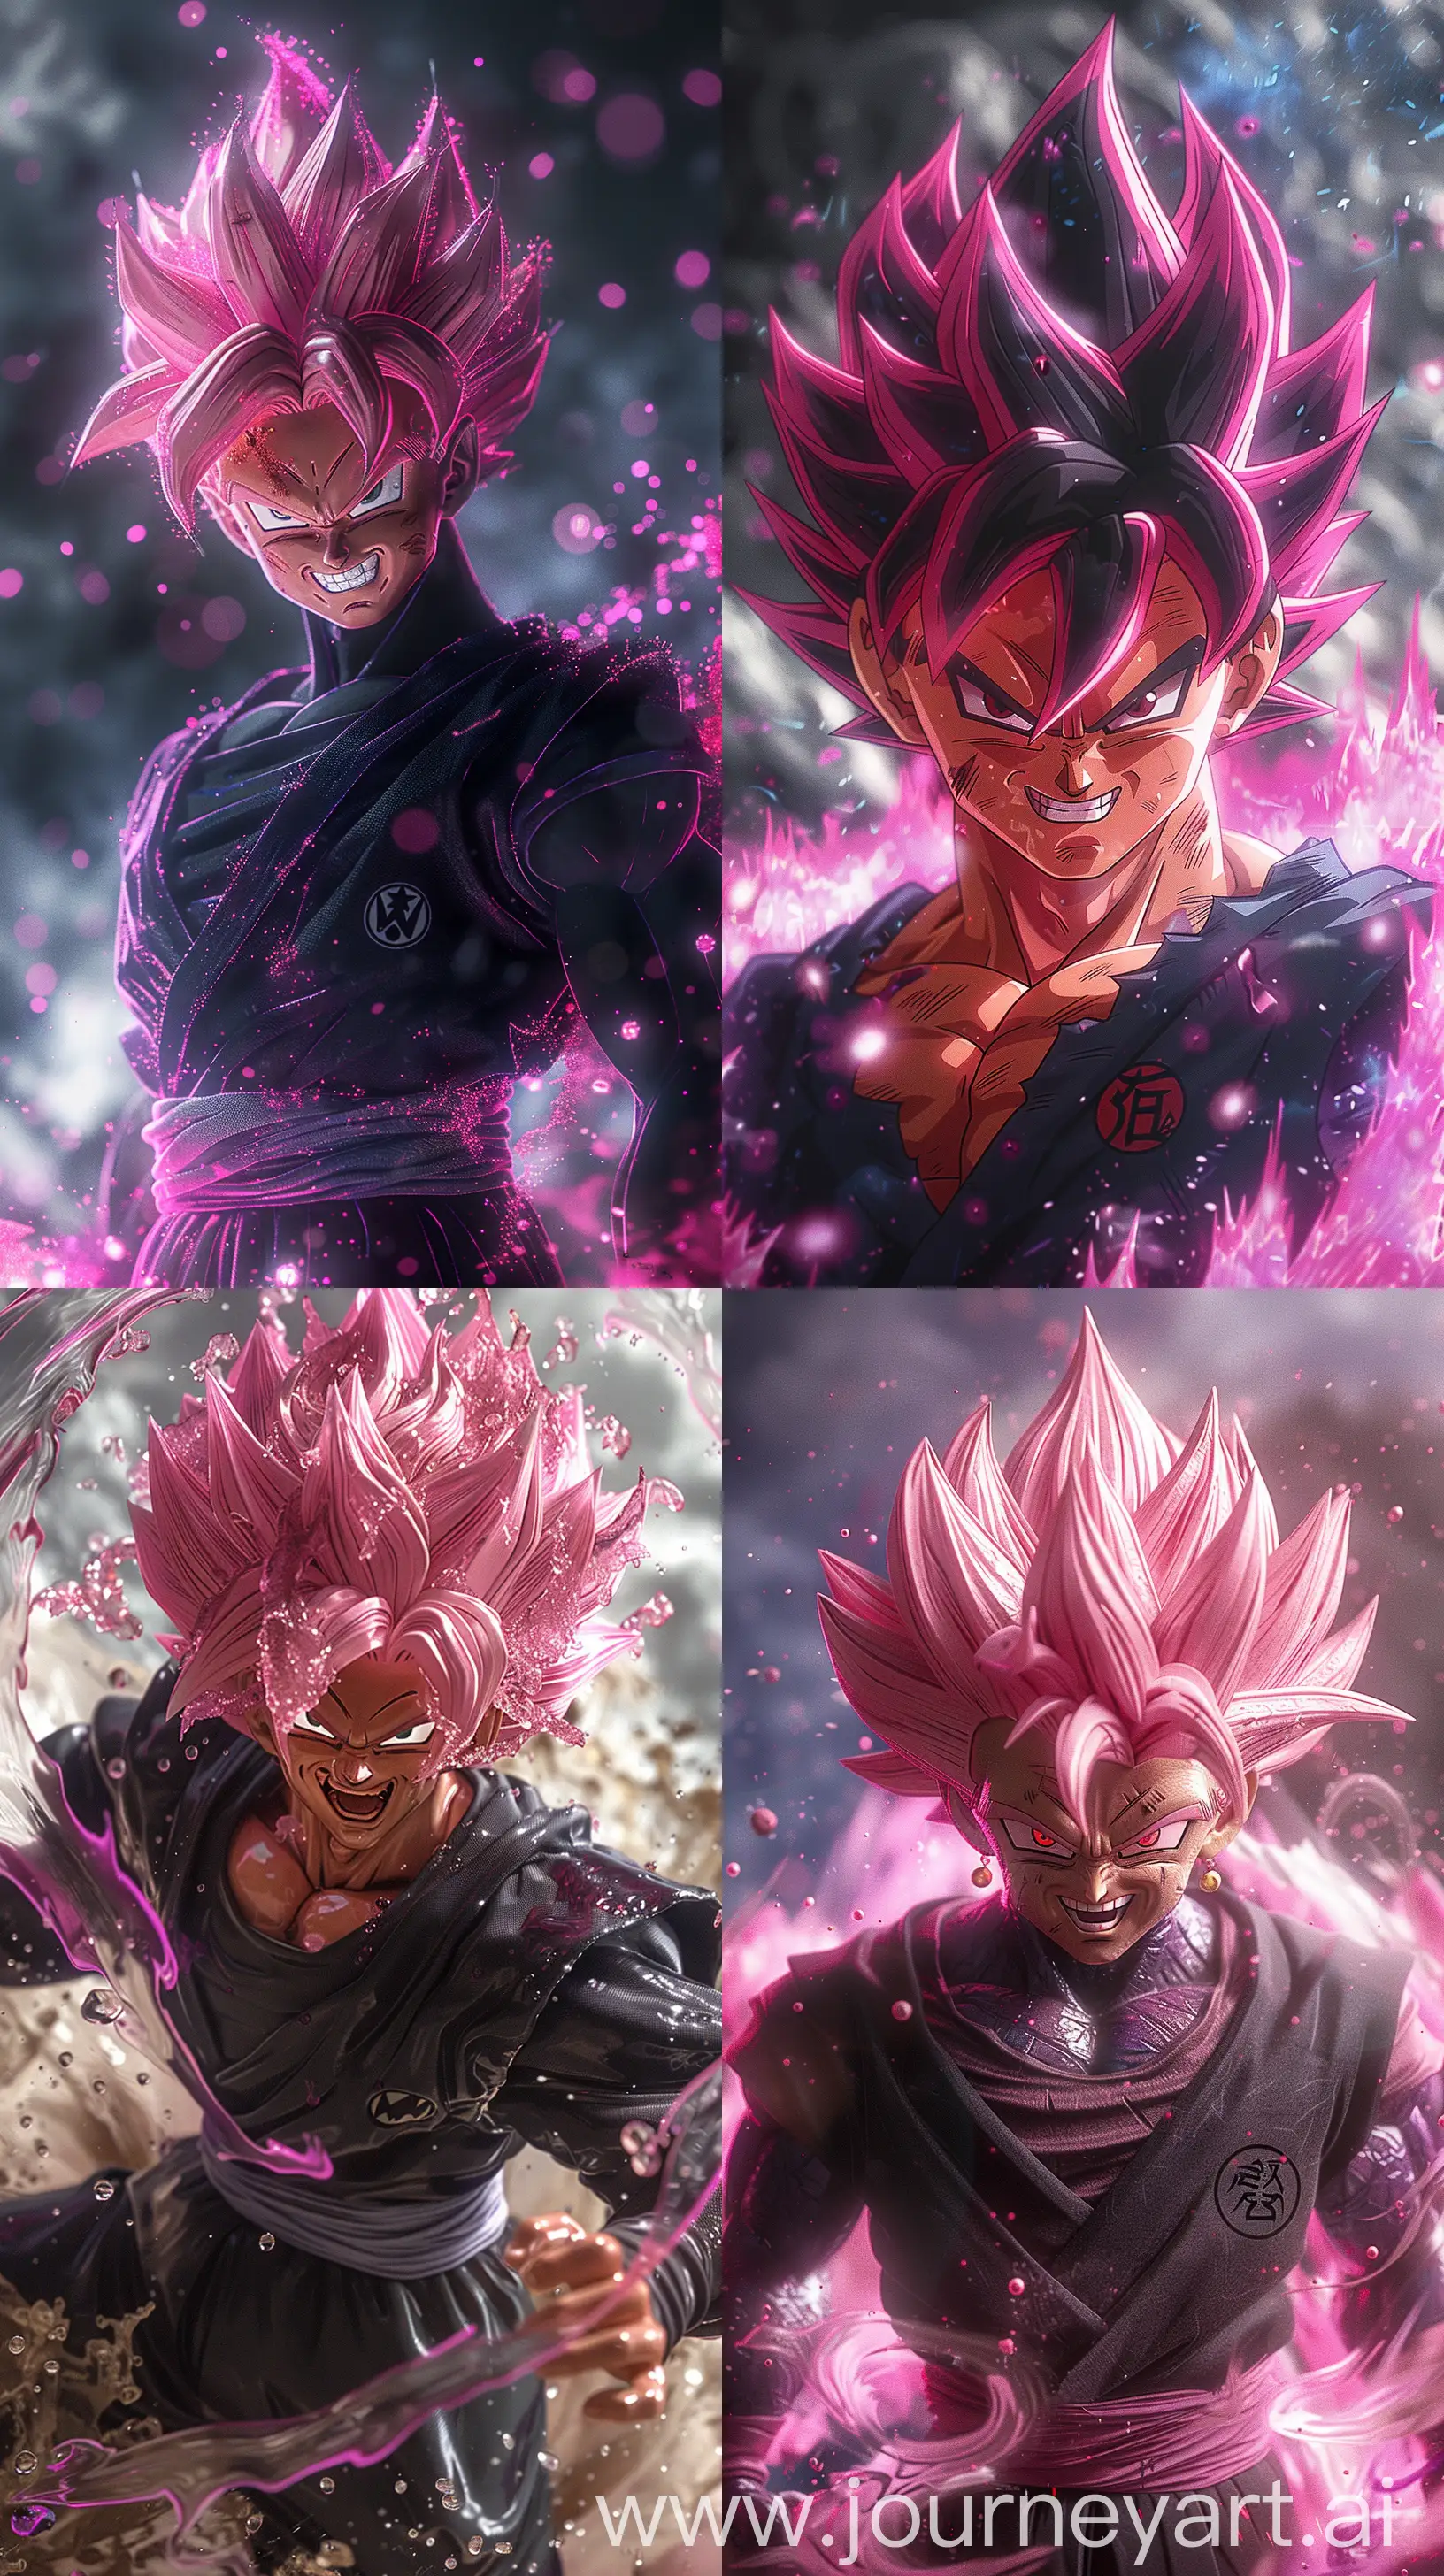 Goku Black with a menacing, villainous grin, Super Saiyan Rosé form, sporting a black outfit, engulfed in swirling aura of purple and pink, in a dynamic action pose, imitating Toei Animation's Dragon Ball Super style --ar 9:16 --s 600 --v 6